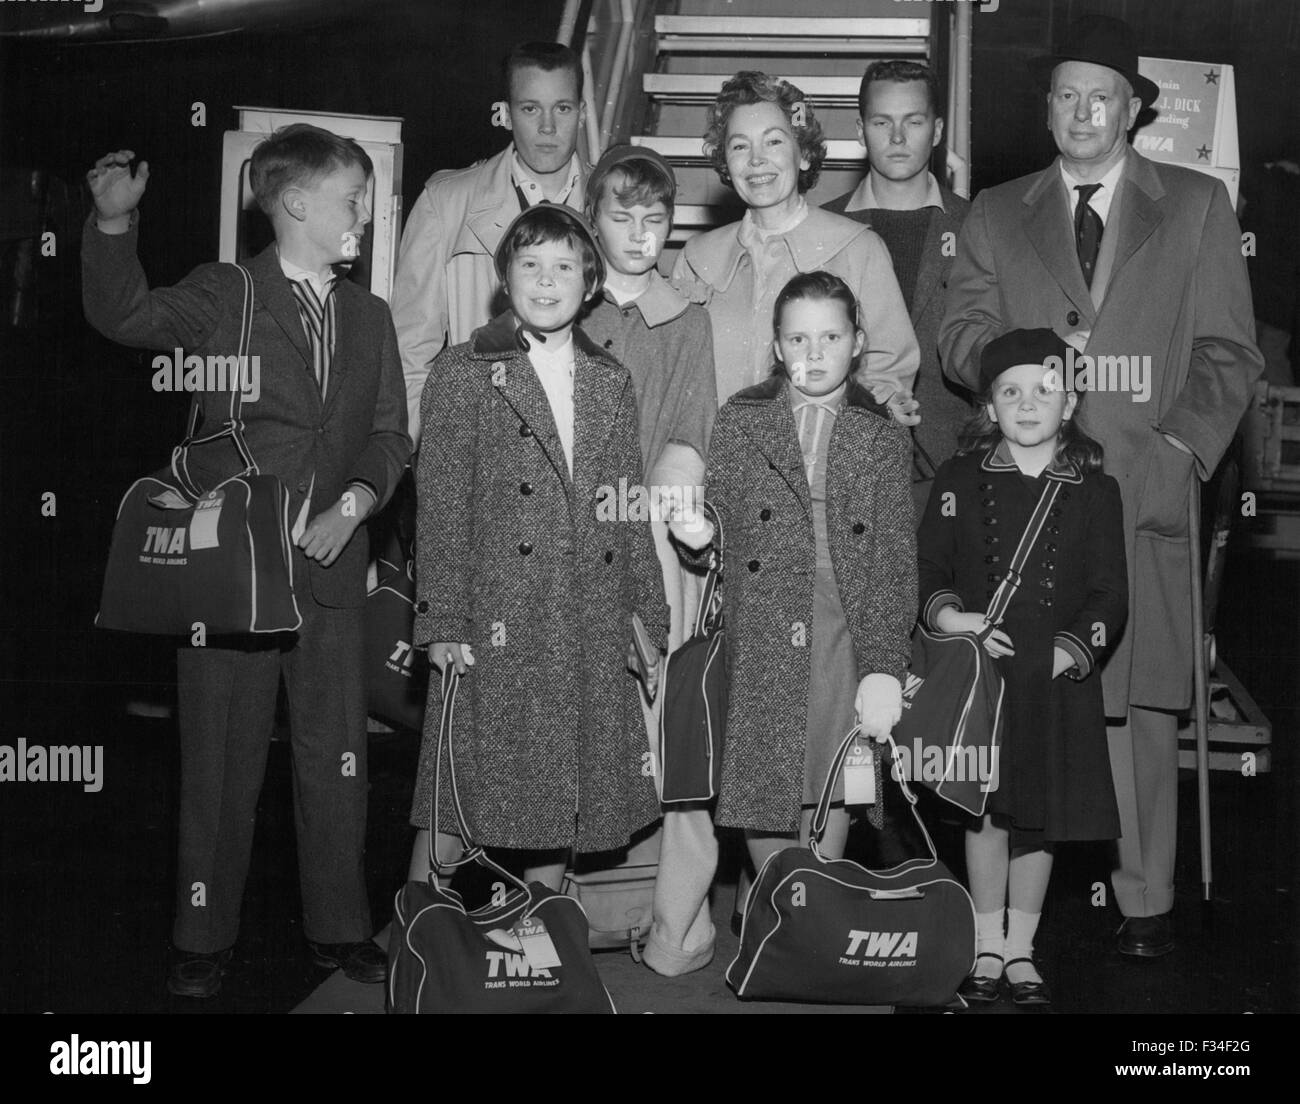 Dec. 26, 1976 - Idlewild Airport New York: Off to Madrid VIA TWA Super G Fly the Farrow Family from Hollywood. Father John Farrow, is famed movie director and he is headed for Spain to start shooting a Warner Bros. Picture on the life of John Paul Jones, The American Naval Hero. Mrs. Farrow is movie actress Maureen O'Sullivan. The seven children are left to right: Front Row: John, Age 11; Prudence, Age 9; Stephanie, Age 3; Therese, Age 6; Left to right back row: Pat, Age 15; Mia, Age 13; Maureen O'Sullivan, Michael, Age 18; and John Farrow Senior. (Credit Image: © Keystone Pictures USA/ZUMAPRE Stock Photo